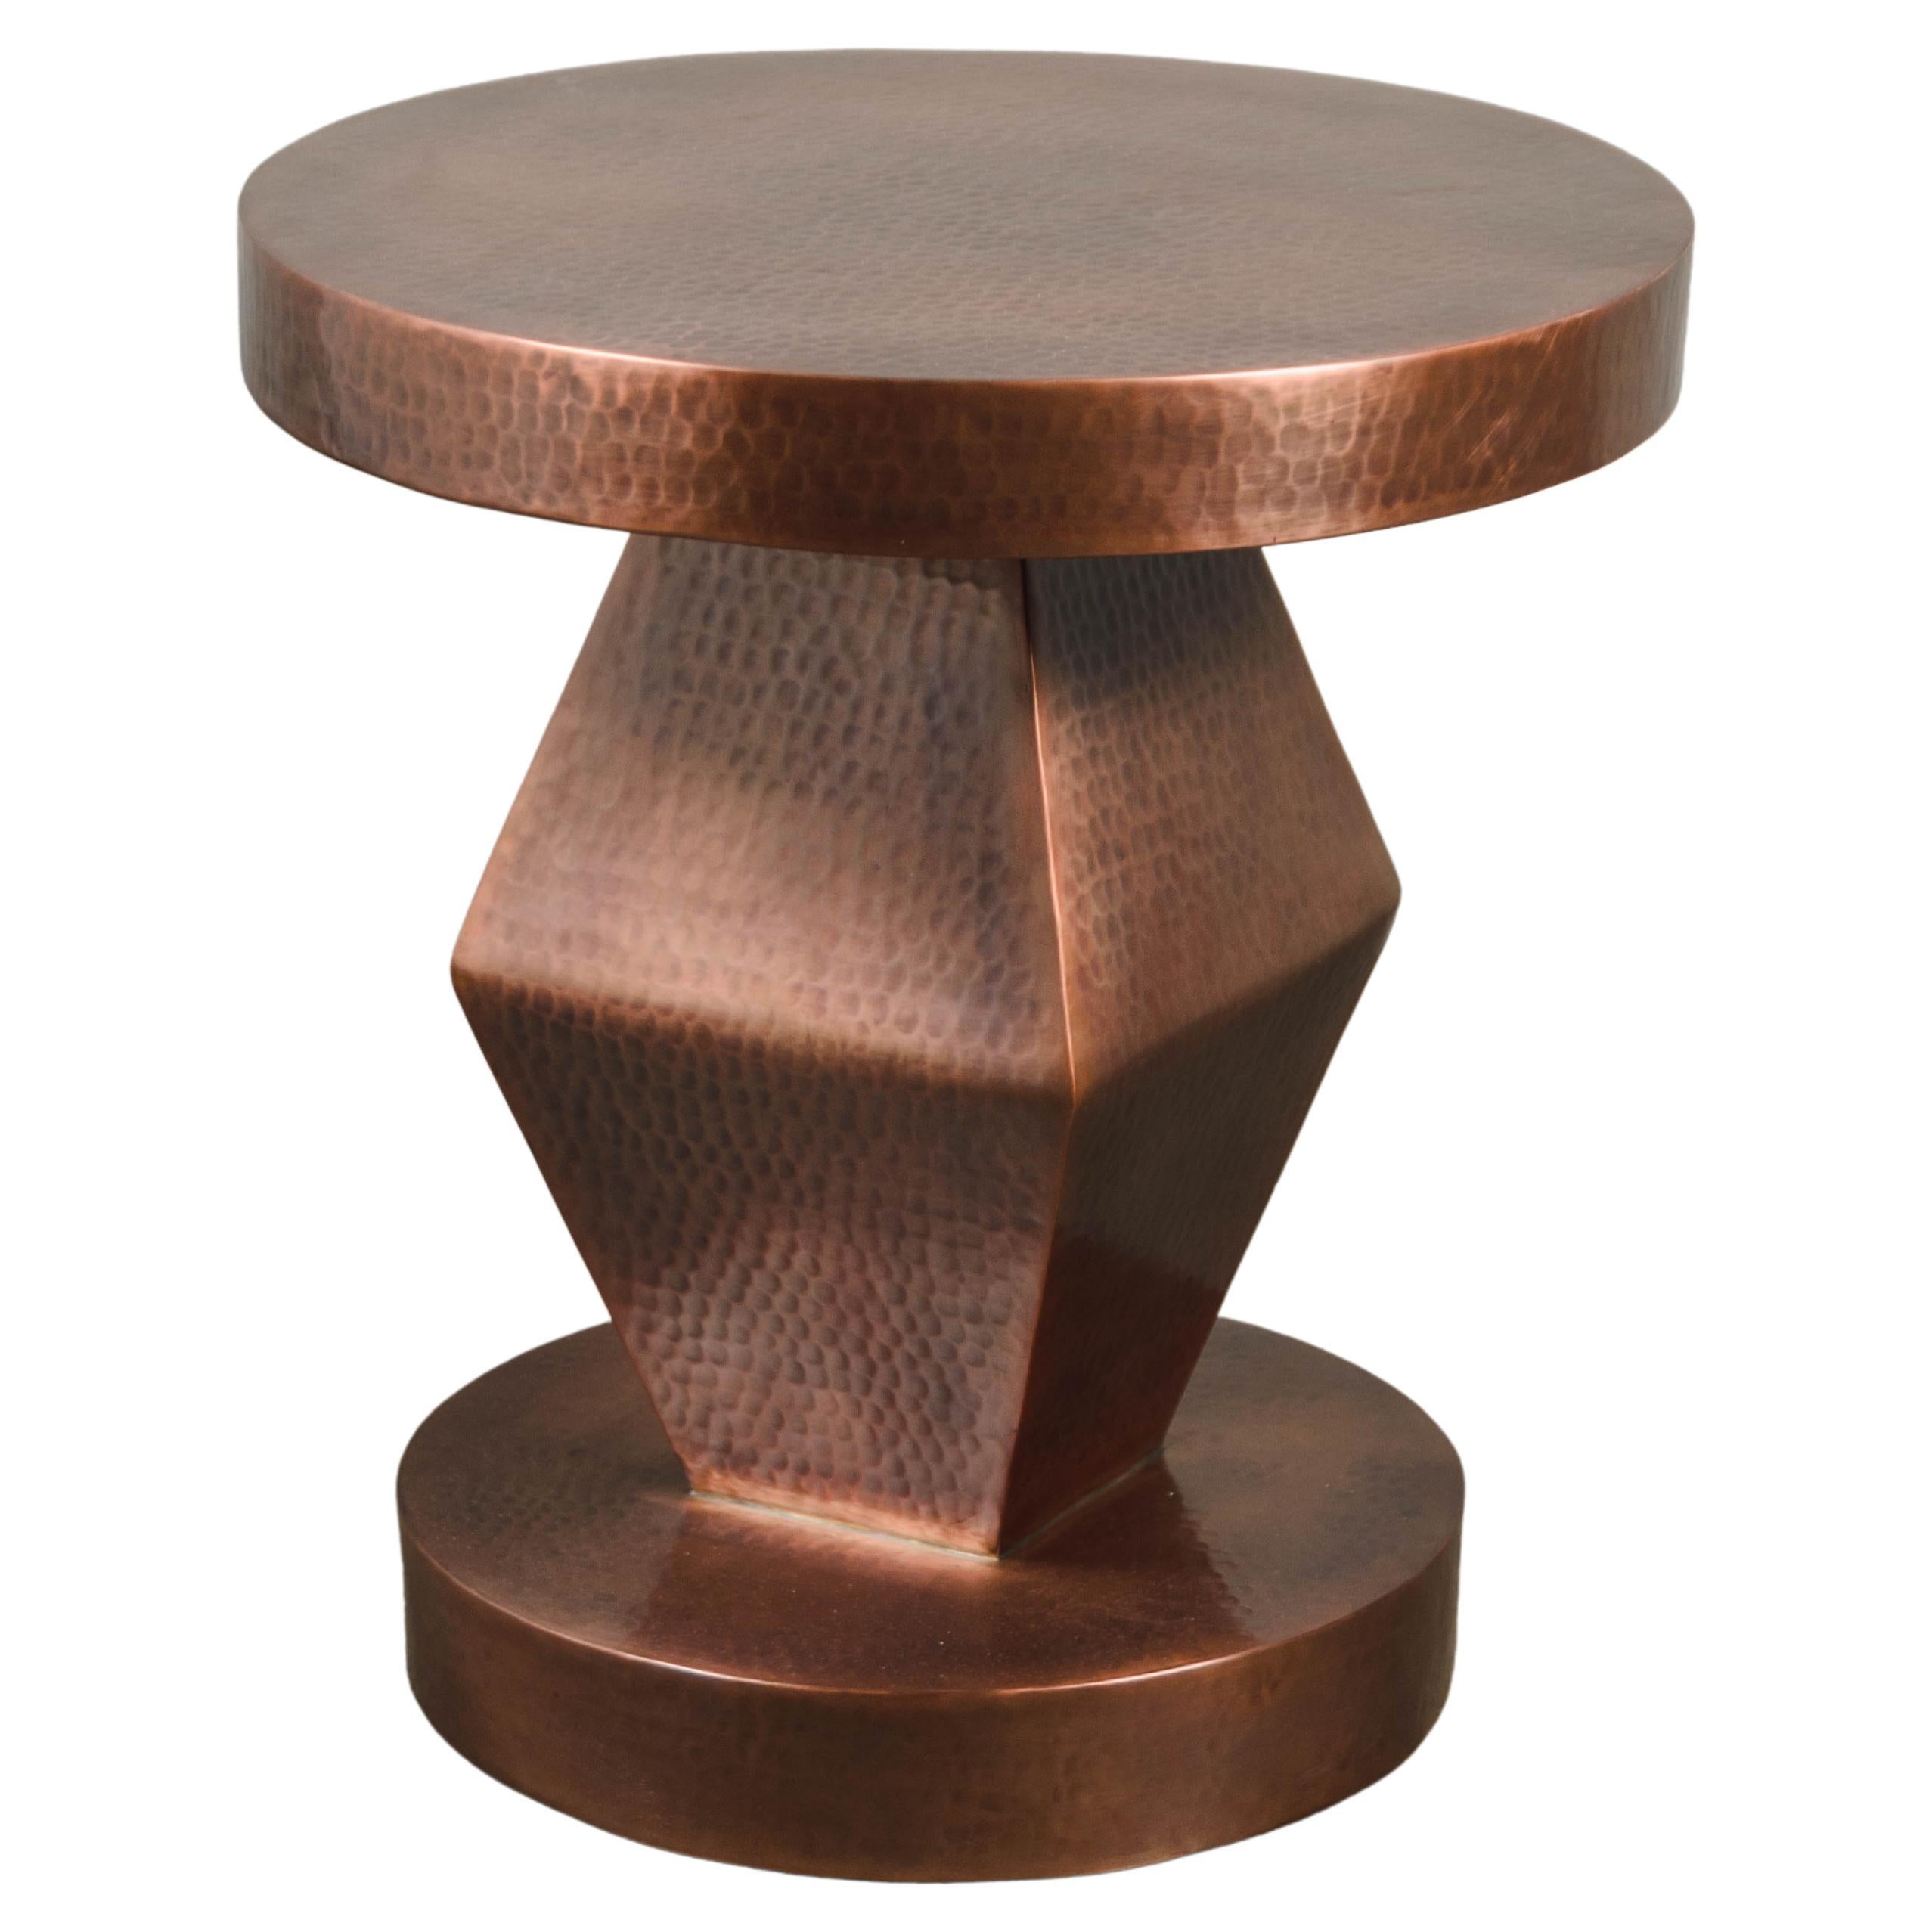 Contemporary Brancusi Table in Antique Copper by Robert Kuo 